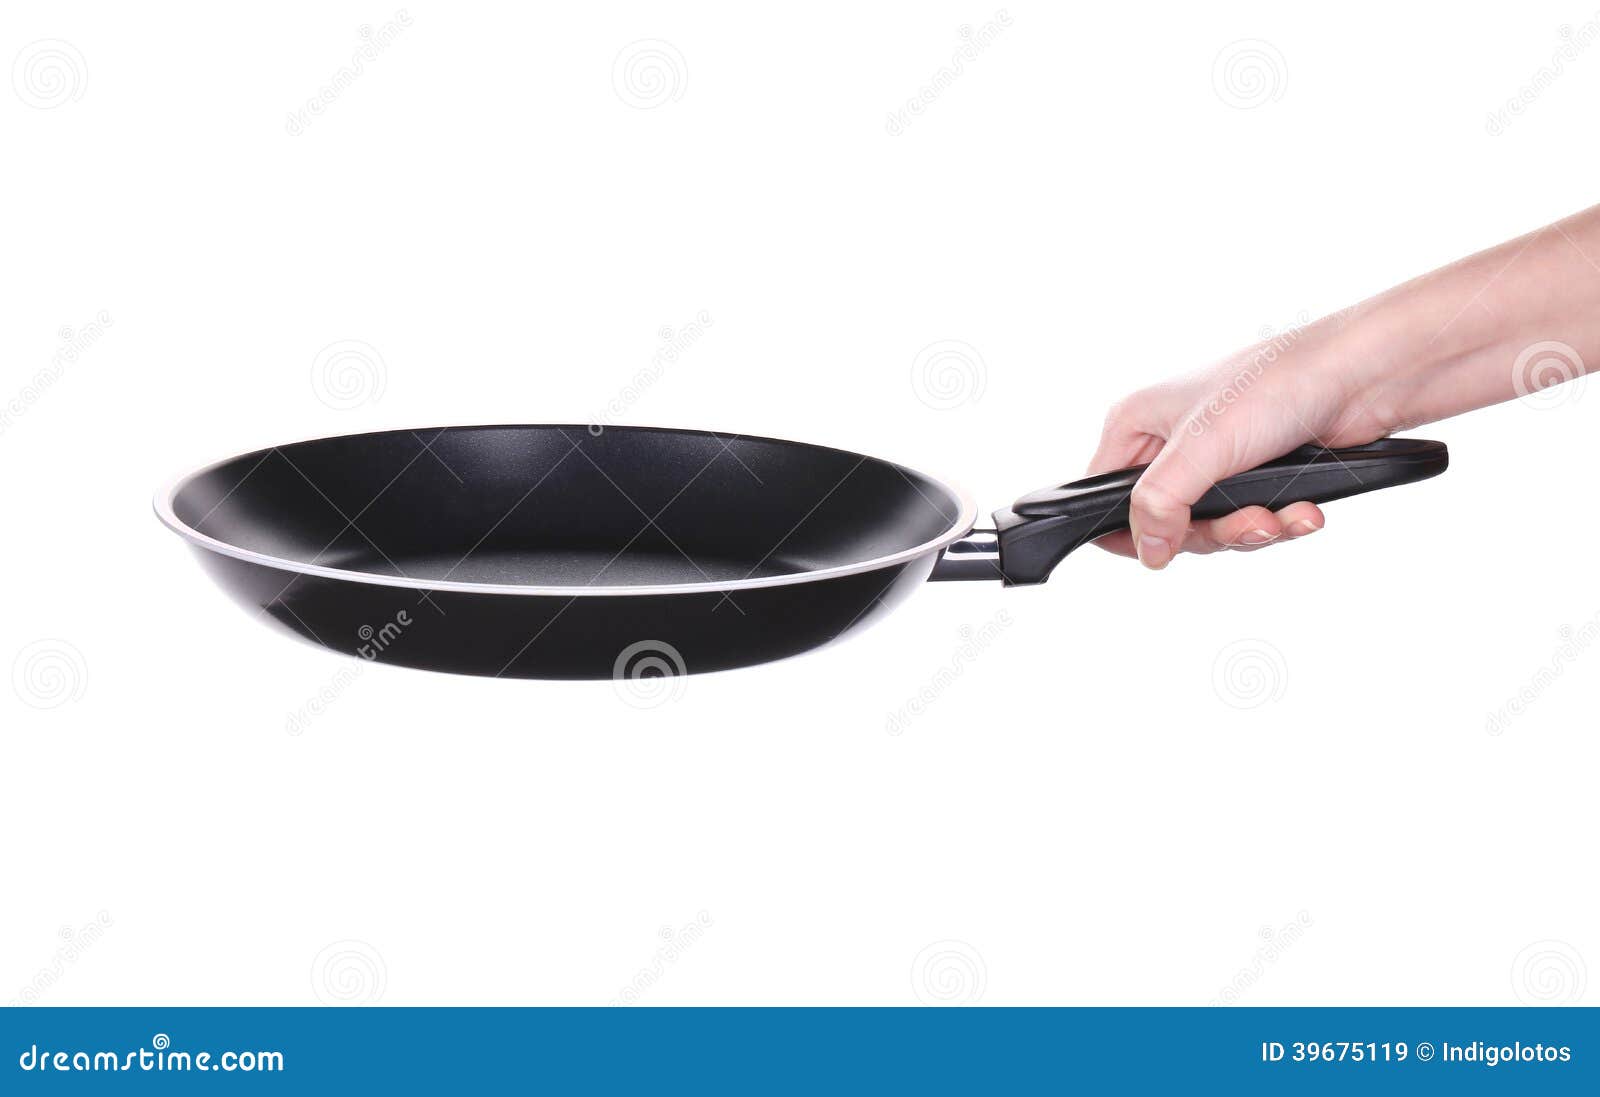 Hand Holding a Black Frying Pan Stock Image - Image of frayed, chef ...